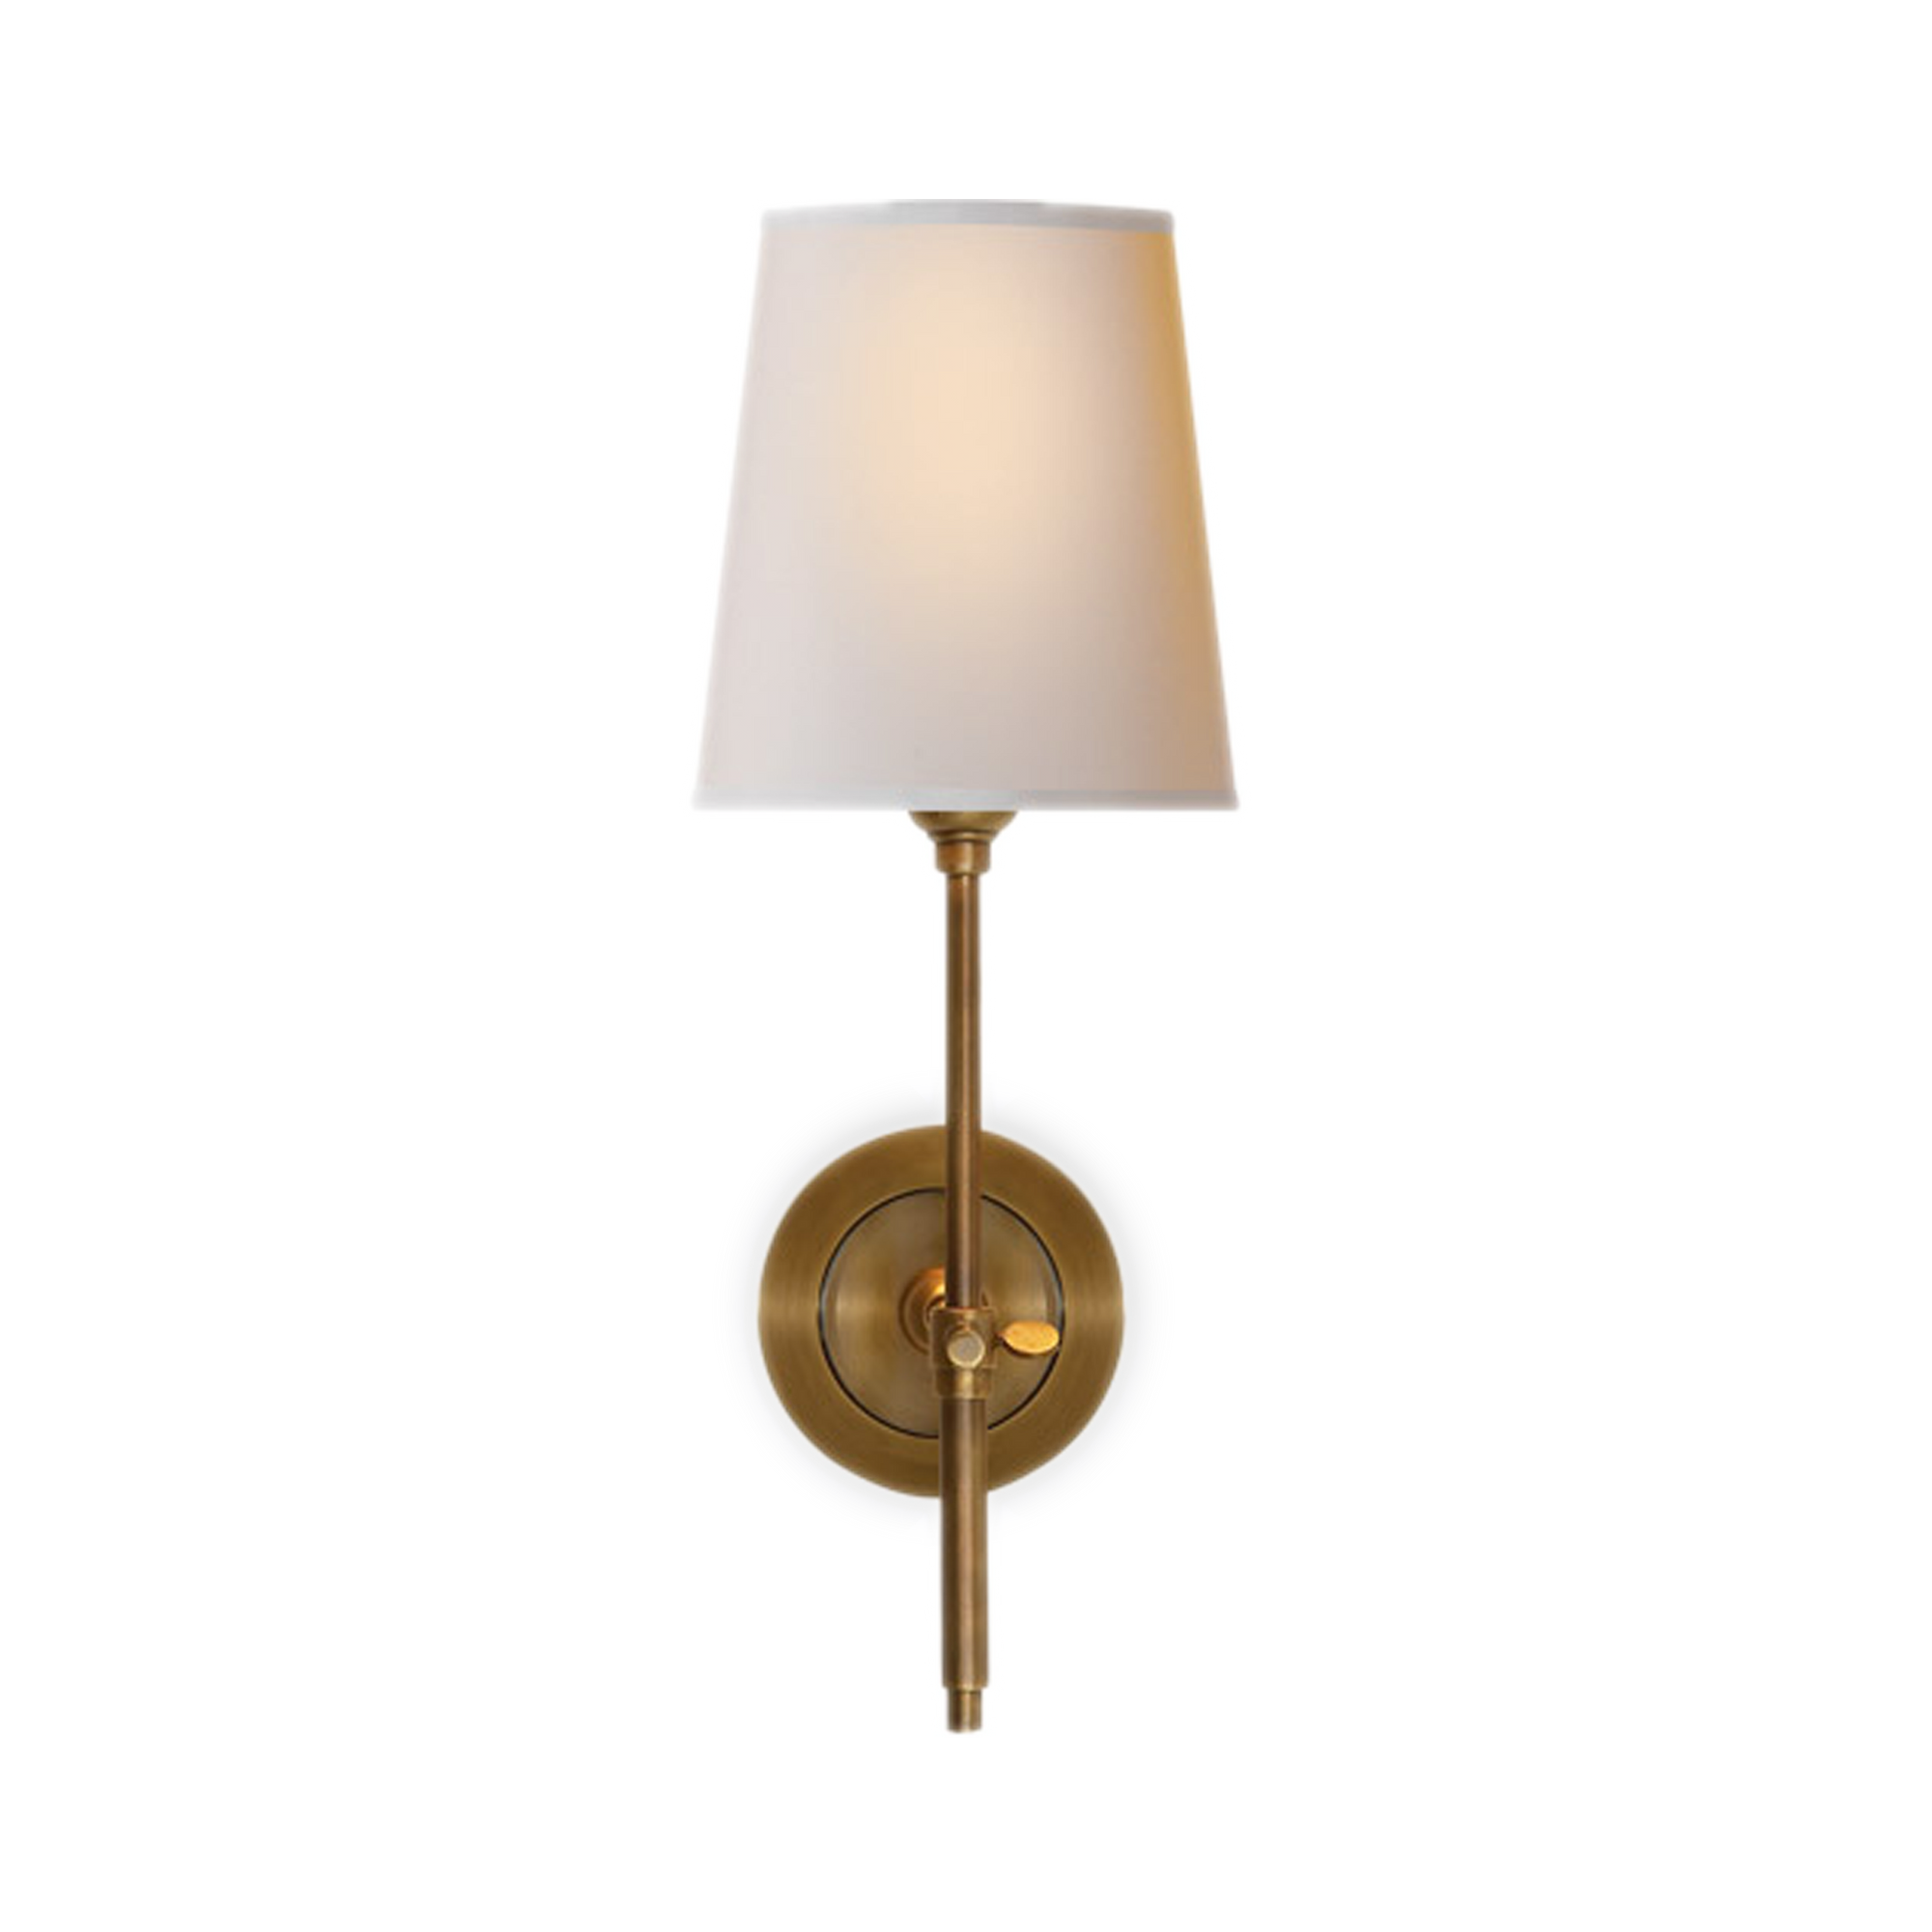 The Bryant Sconce bridges traditional and modern styles.